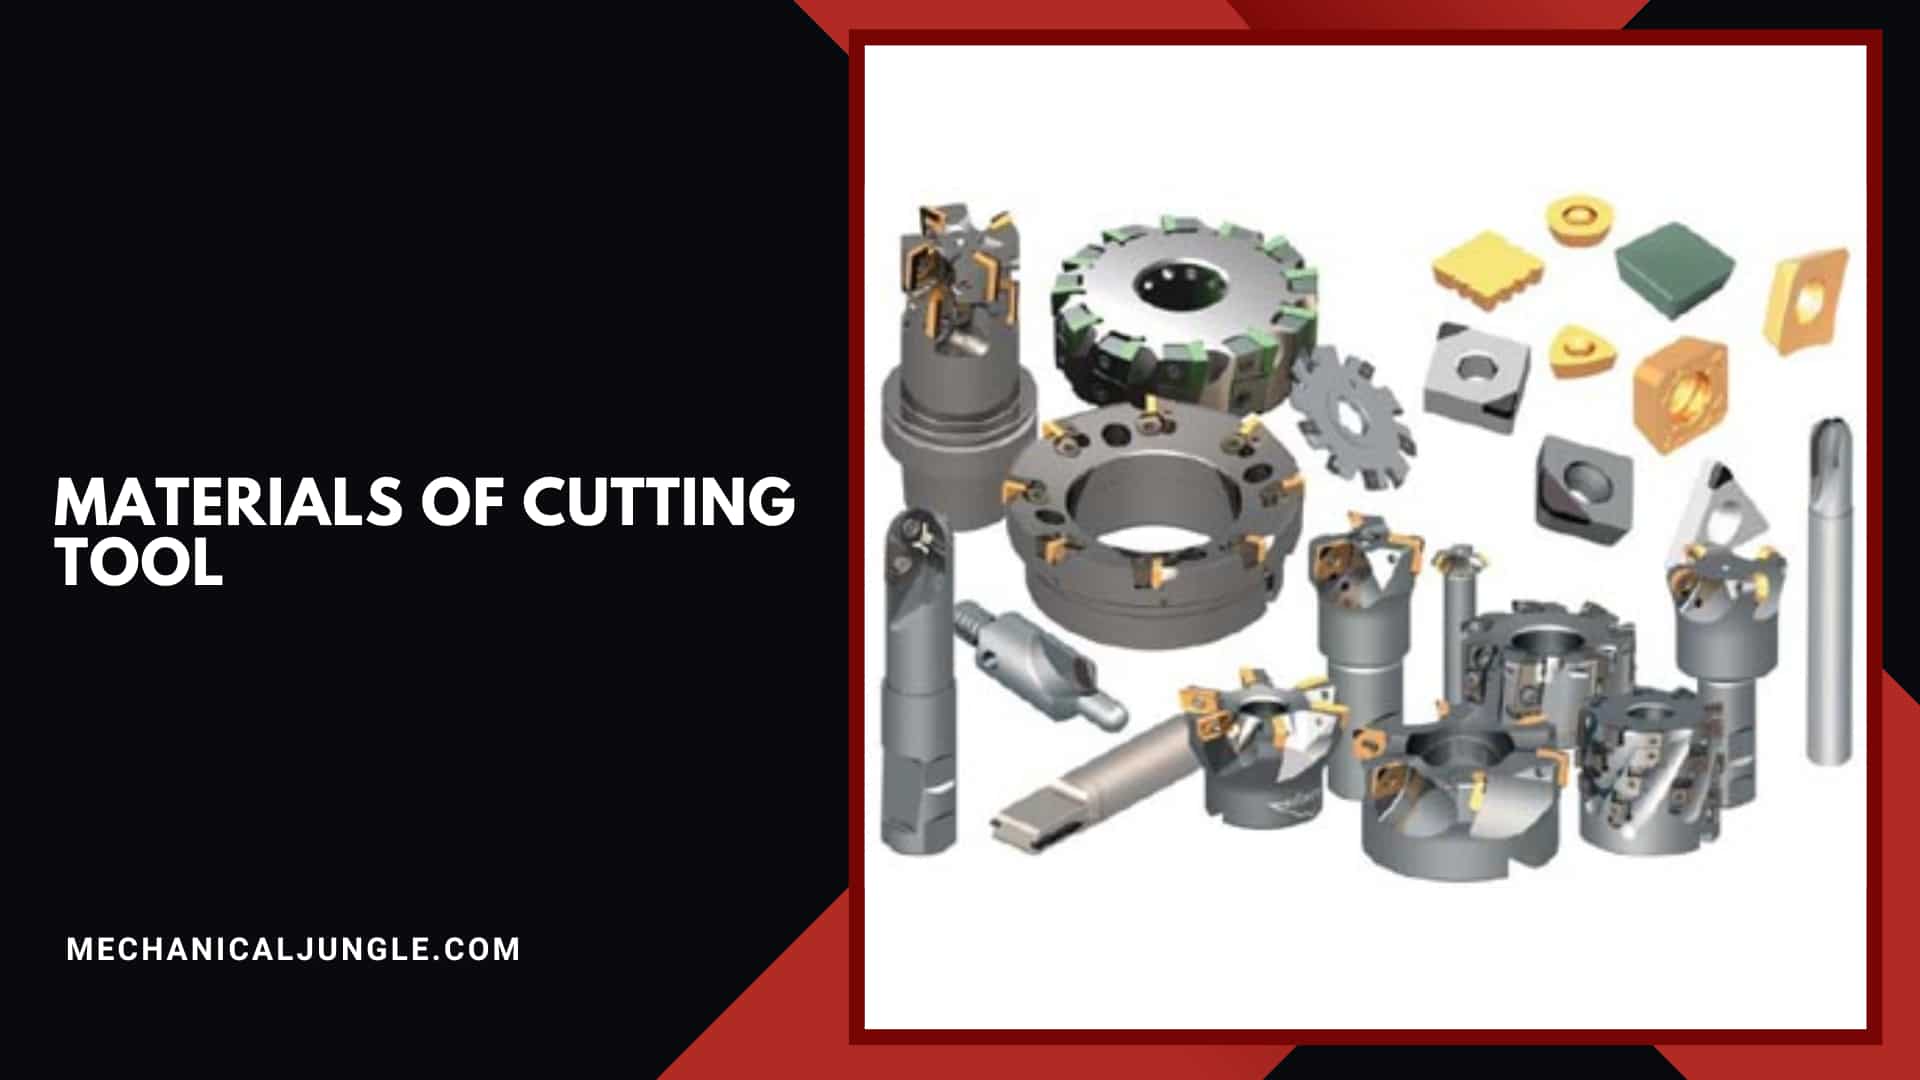 Materials of Cutting Tool